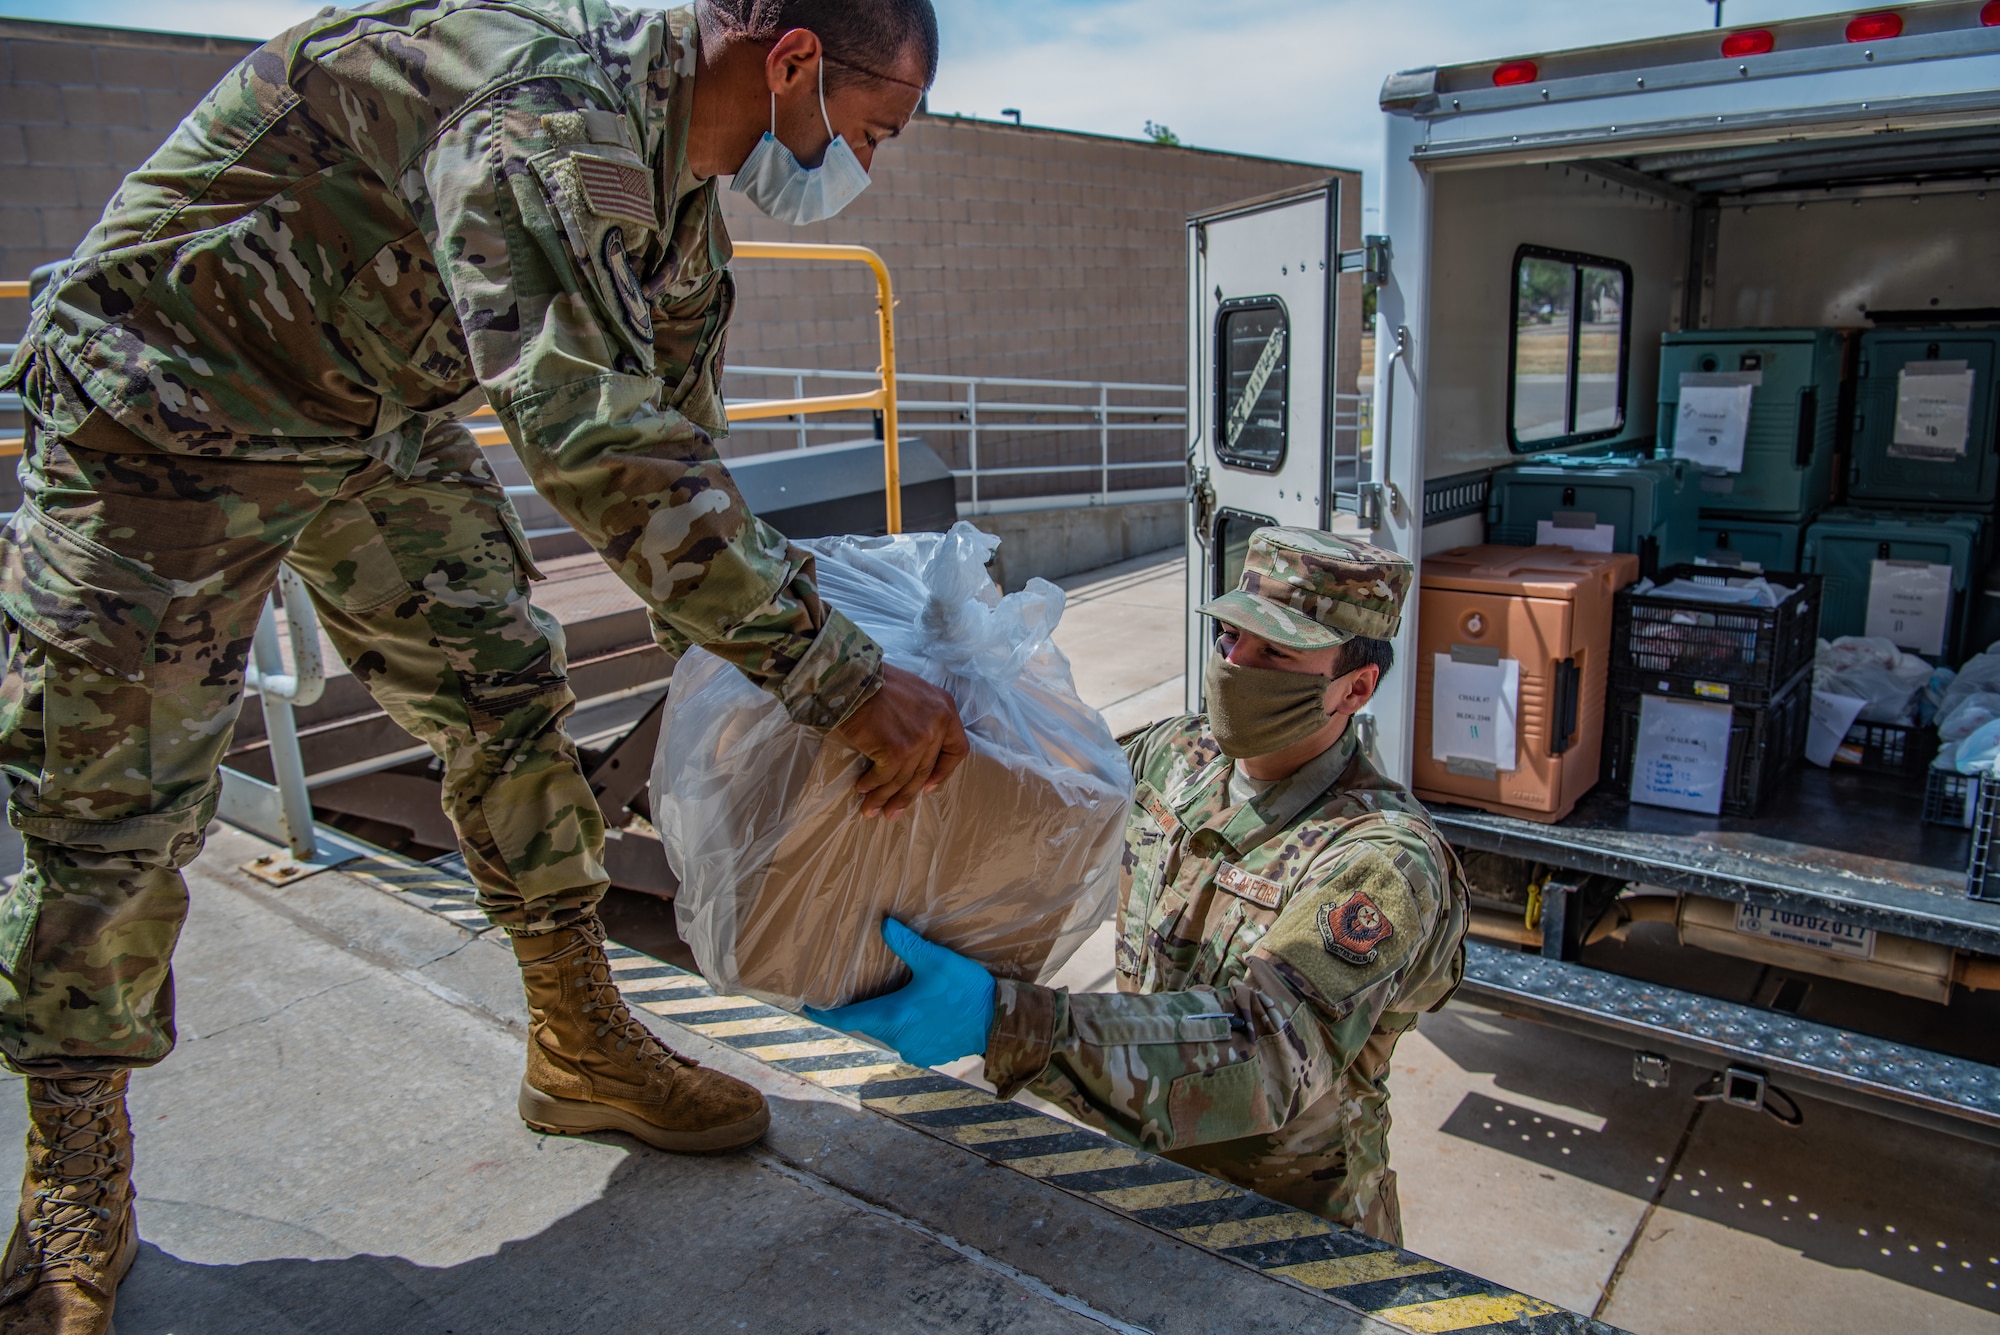 Airman 1st Class Gabrield Alvarado, left, a food services specialist assigned to the 27th Special Operations Force Support Squadron, hands a box of food to Airman 1st Class Brandon Brown, a ground transportation apprentice assigned to the 27th Special Operations Logistics Readiness Squadron, for delivery to quarantined Airmen at the Pecos Trail Dining Facility on Cannon Air Force Base, N.M., May 15, 2020. Each hot meal delivered to Airmen quarantined to the base contains a starch, a vegetable or fruit, a protein and a bread, as well as drinks and snacks. (U.S. Air Force photo by Senior Airman Maxwell Daigle)